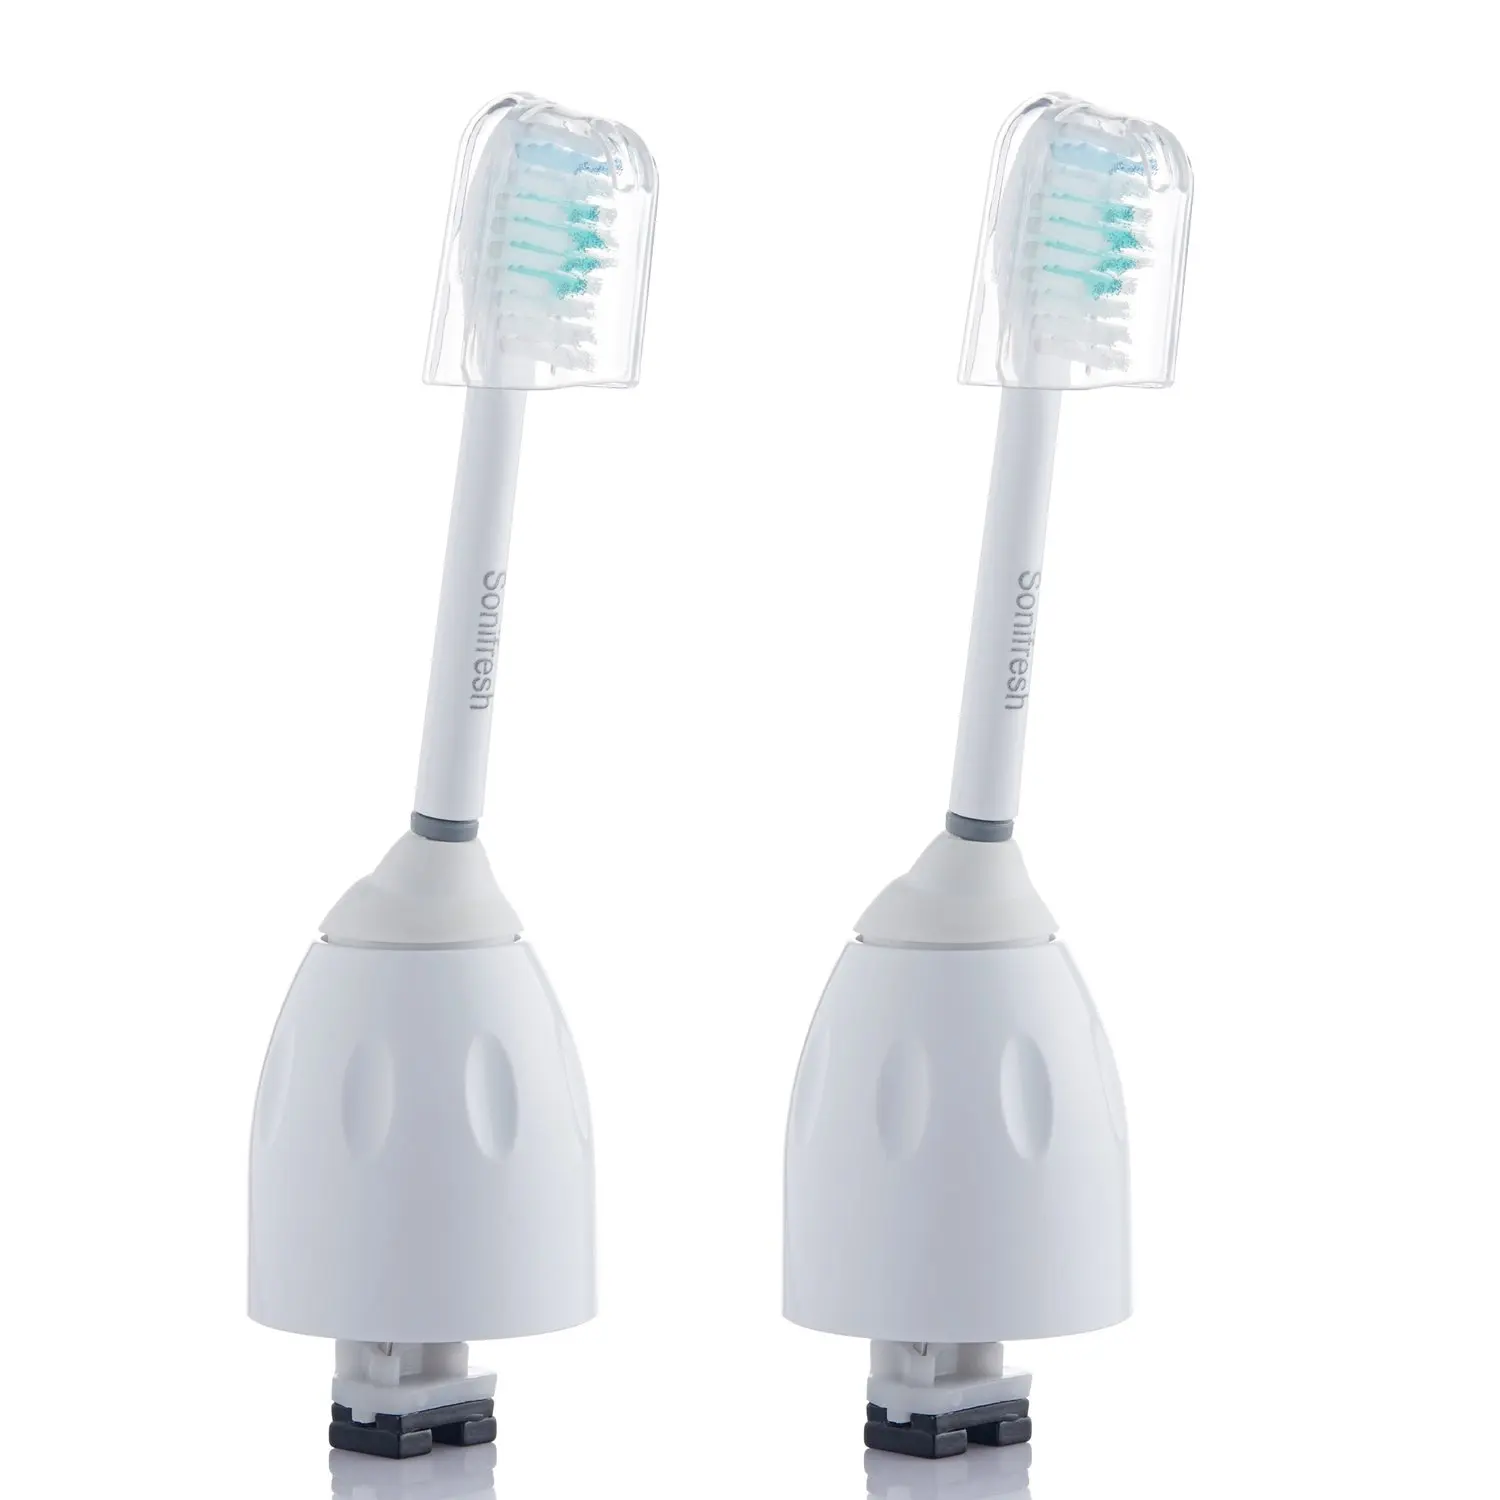 Philips Sonicare Toothbrush Replacement Heads E Series